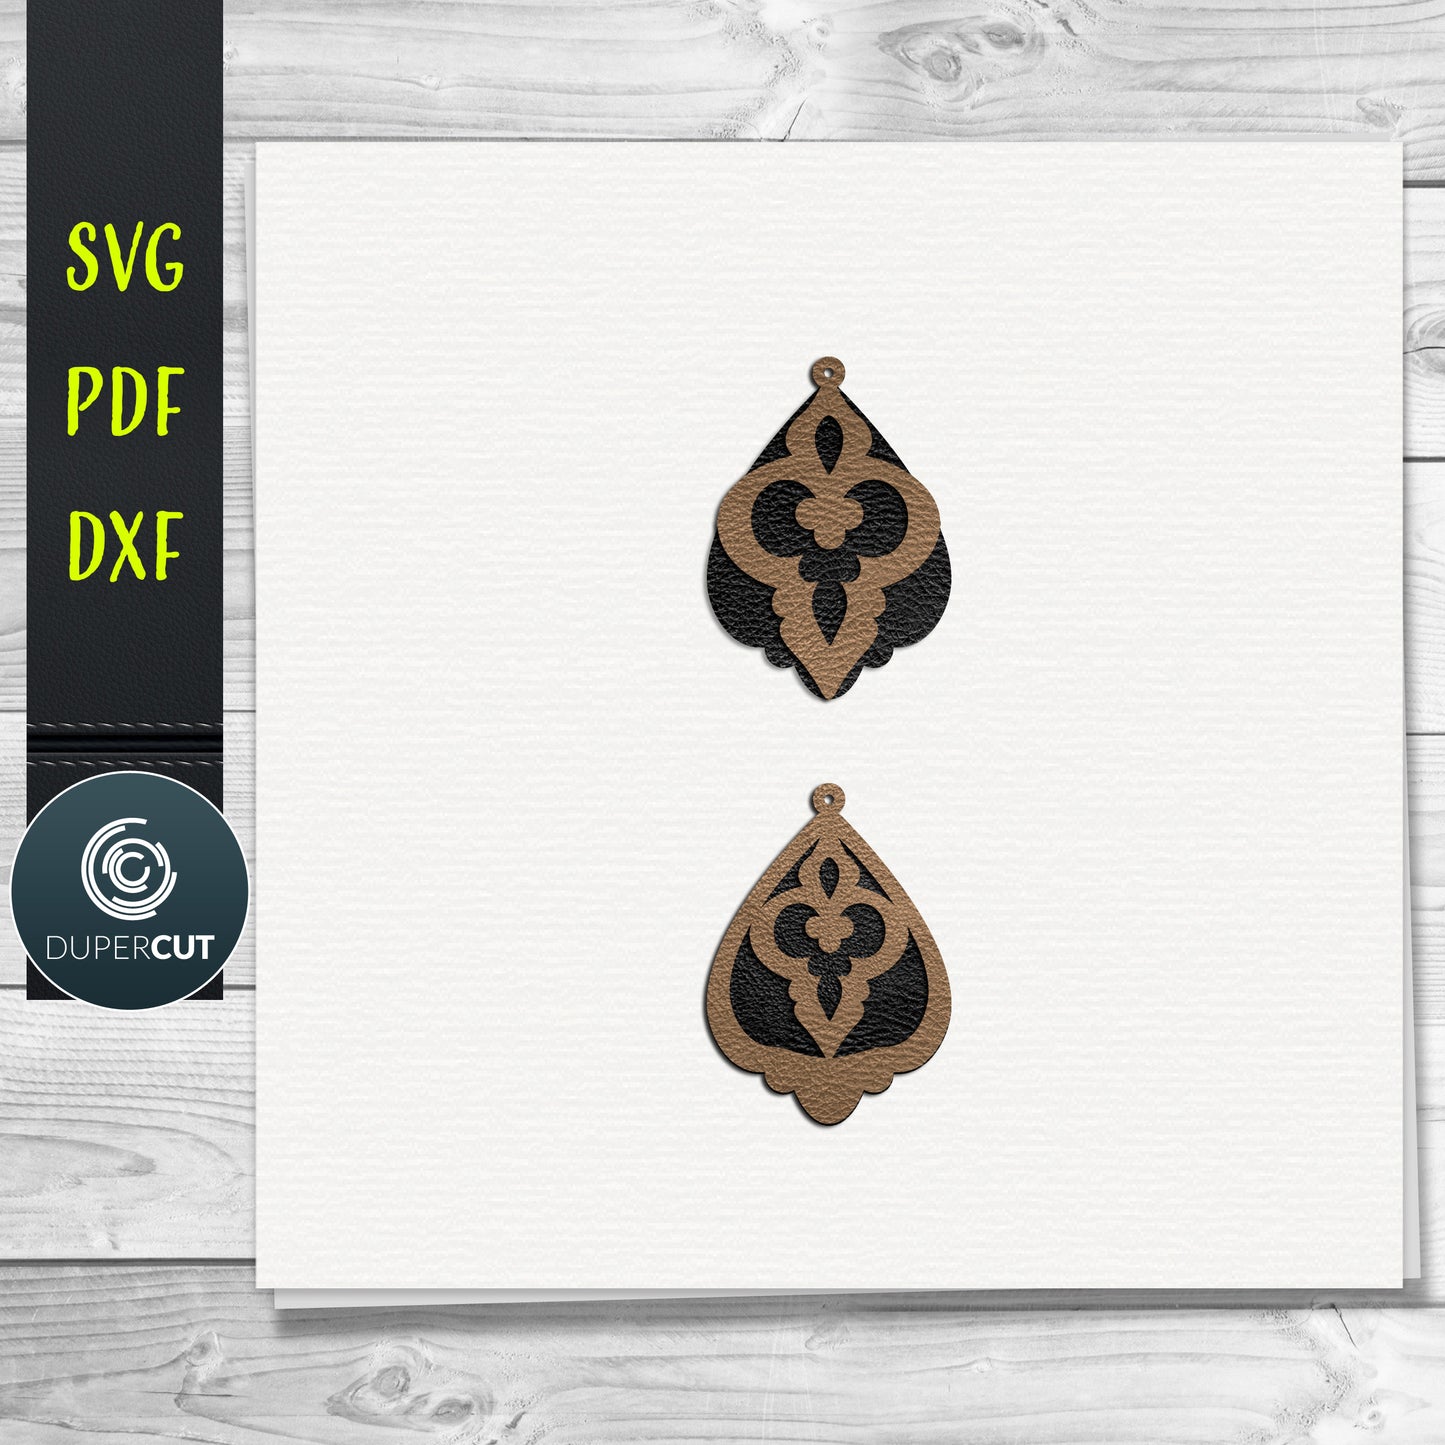 Simple DIY Layered Leather Earrings SVG PDF DXF vector files. Jewellery making template for laser and cutting machines - Glowforge, Cricut, Silhouette Cameo.